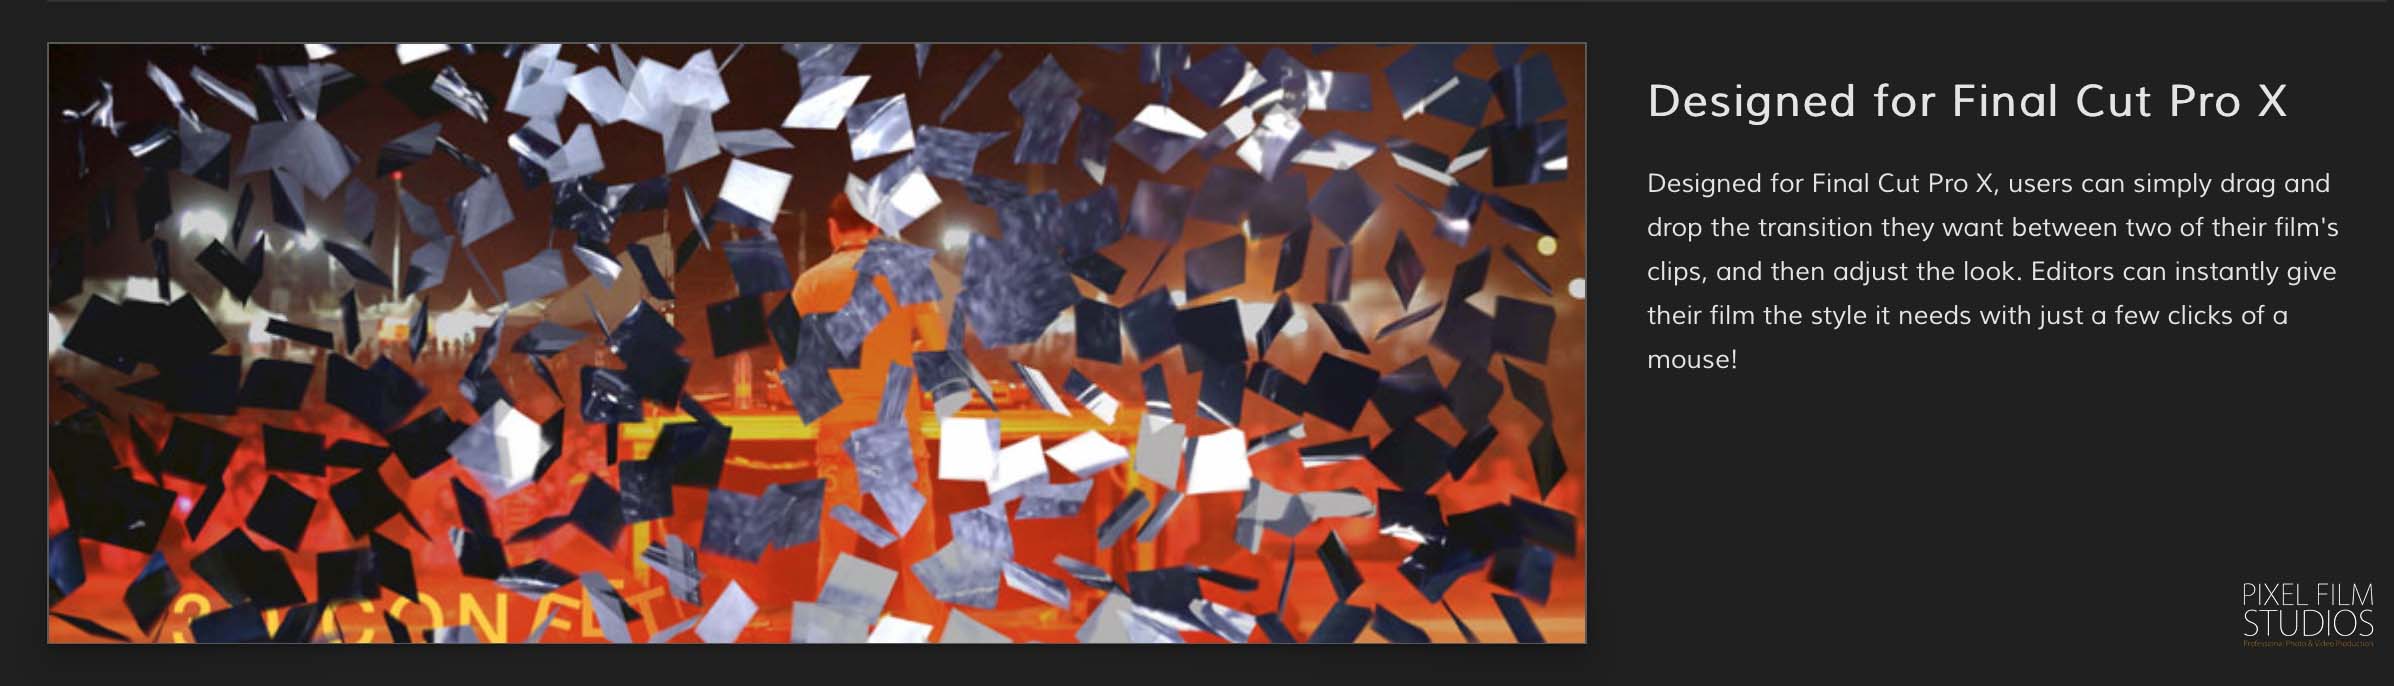 FCPX3D Confetti Transition effect for Final Cut Pro X from Pixel Film Studios